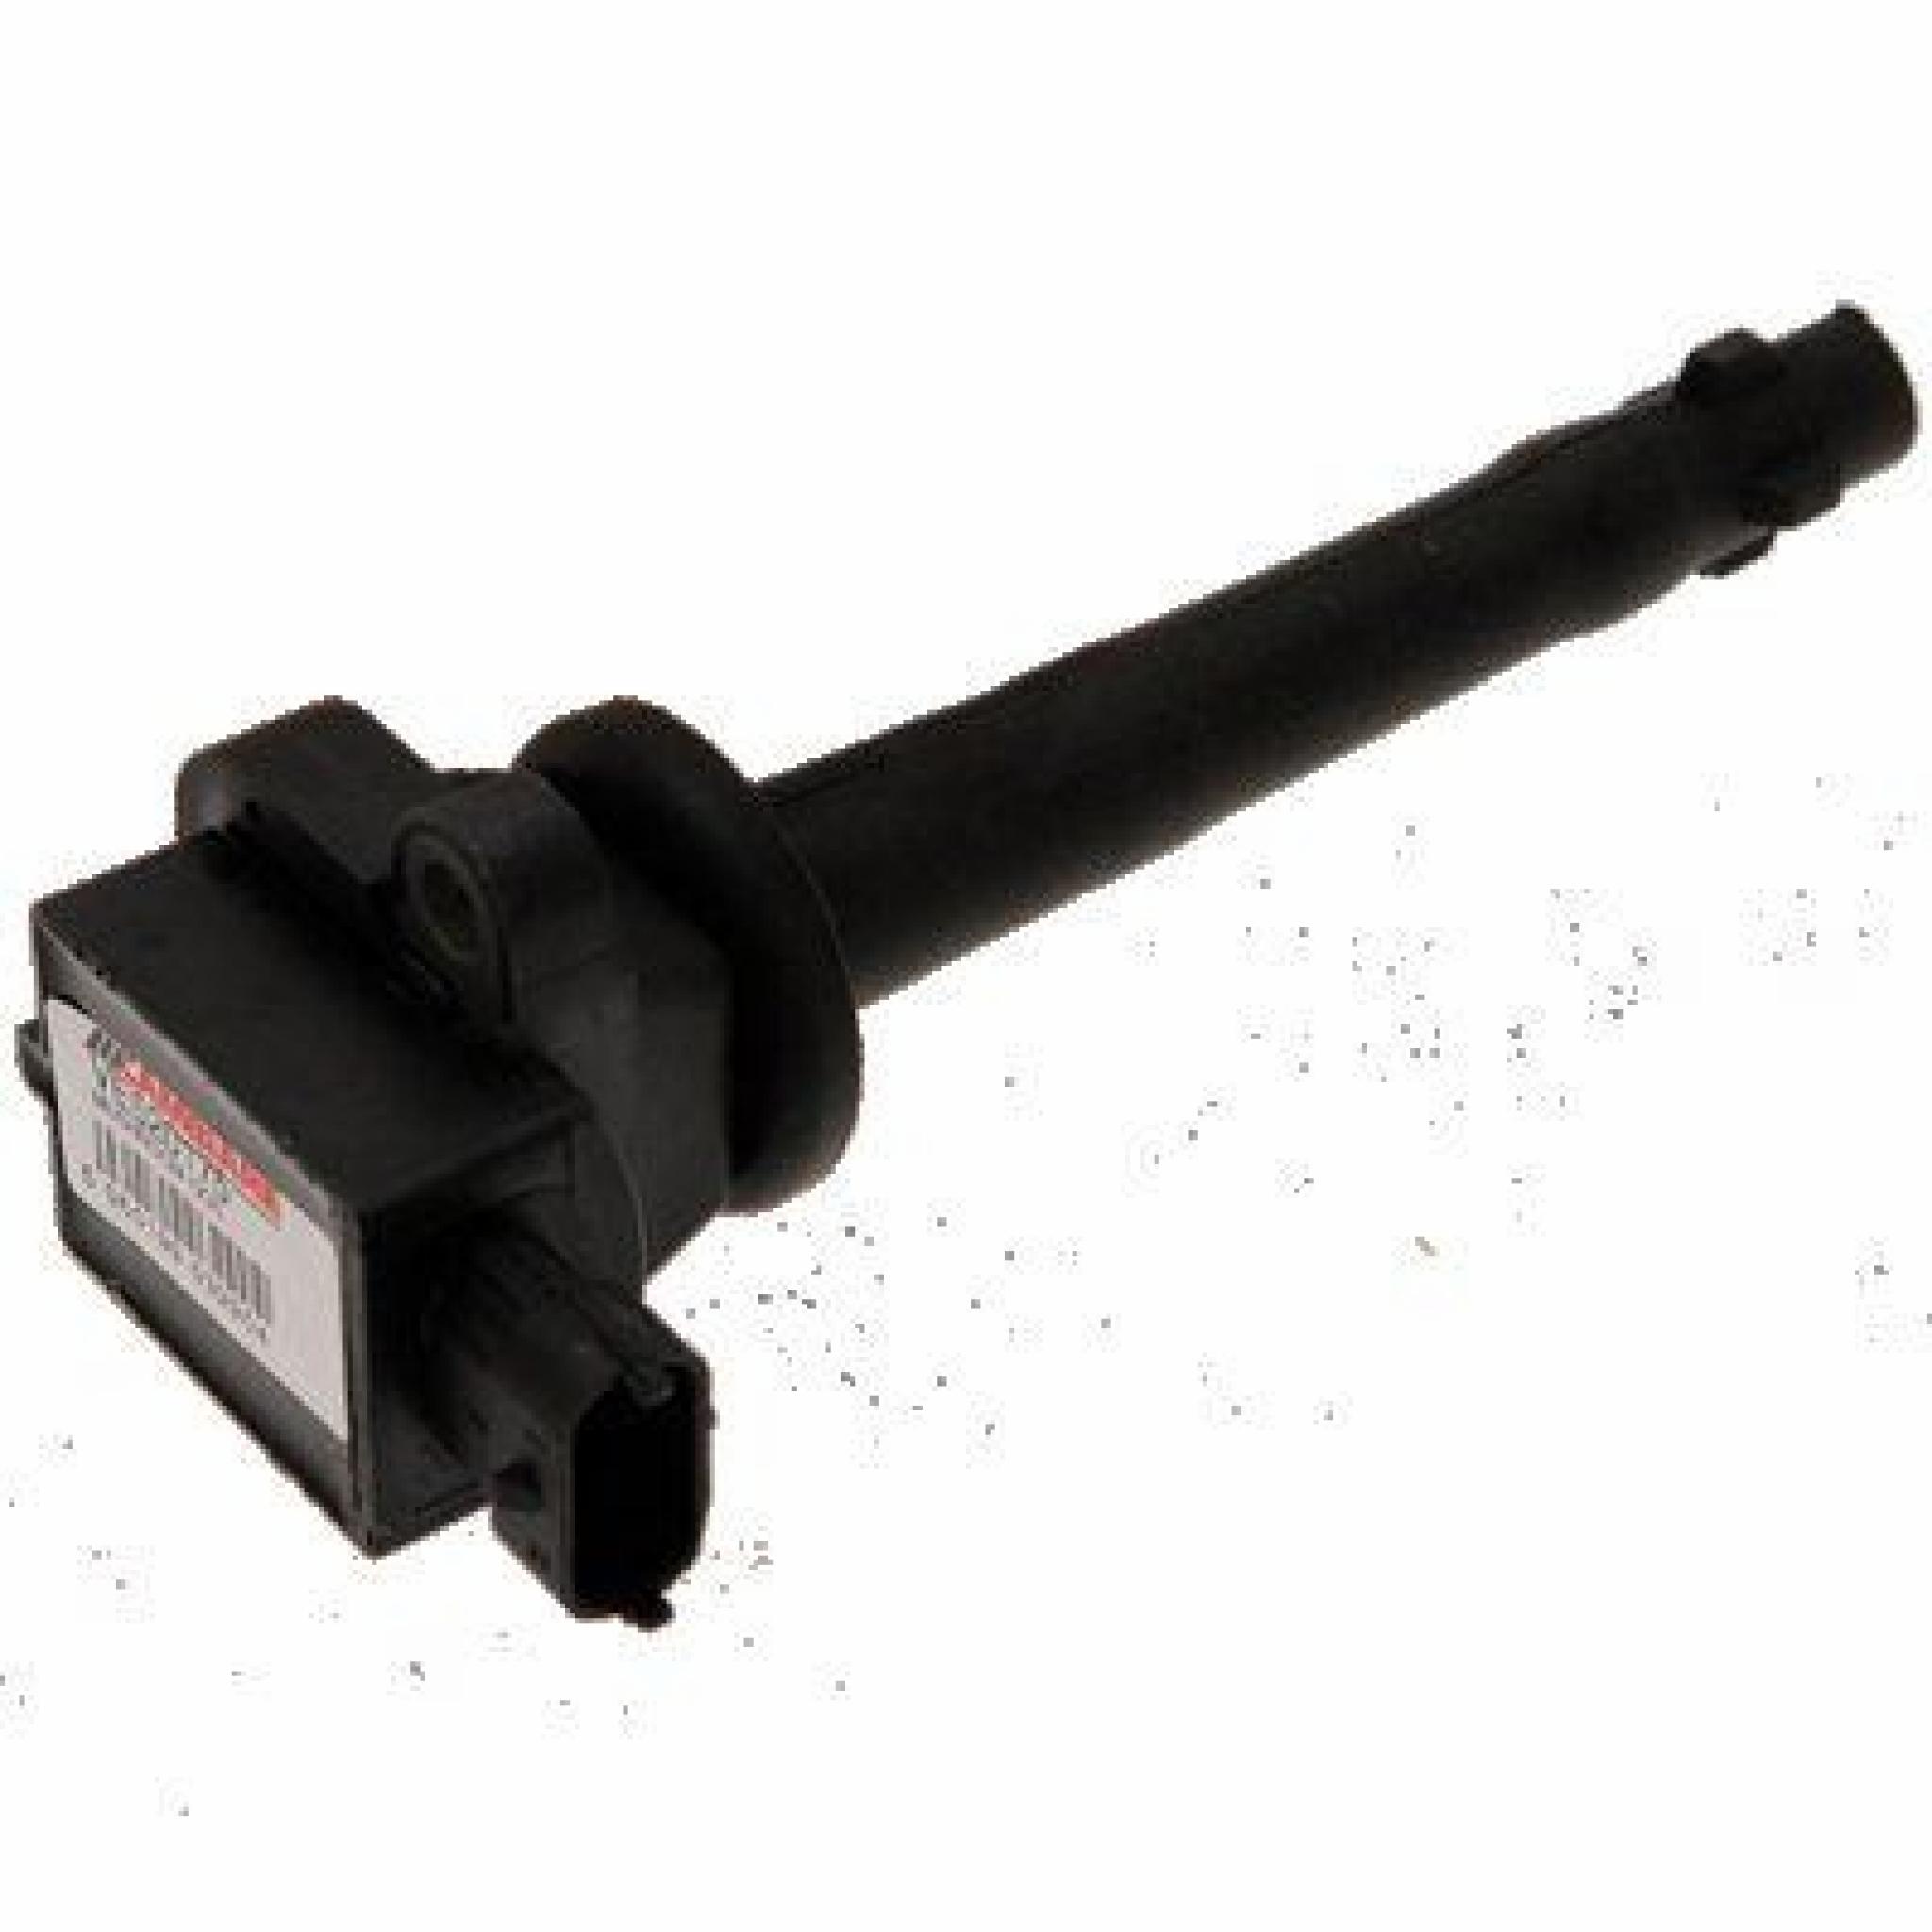 Nissan micra ignition coil